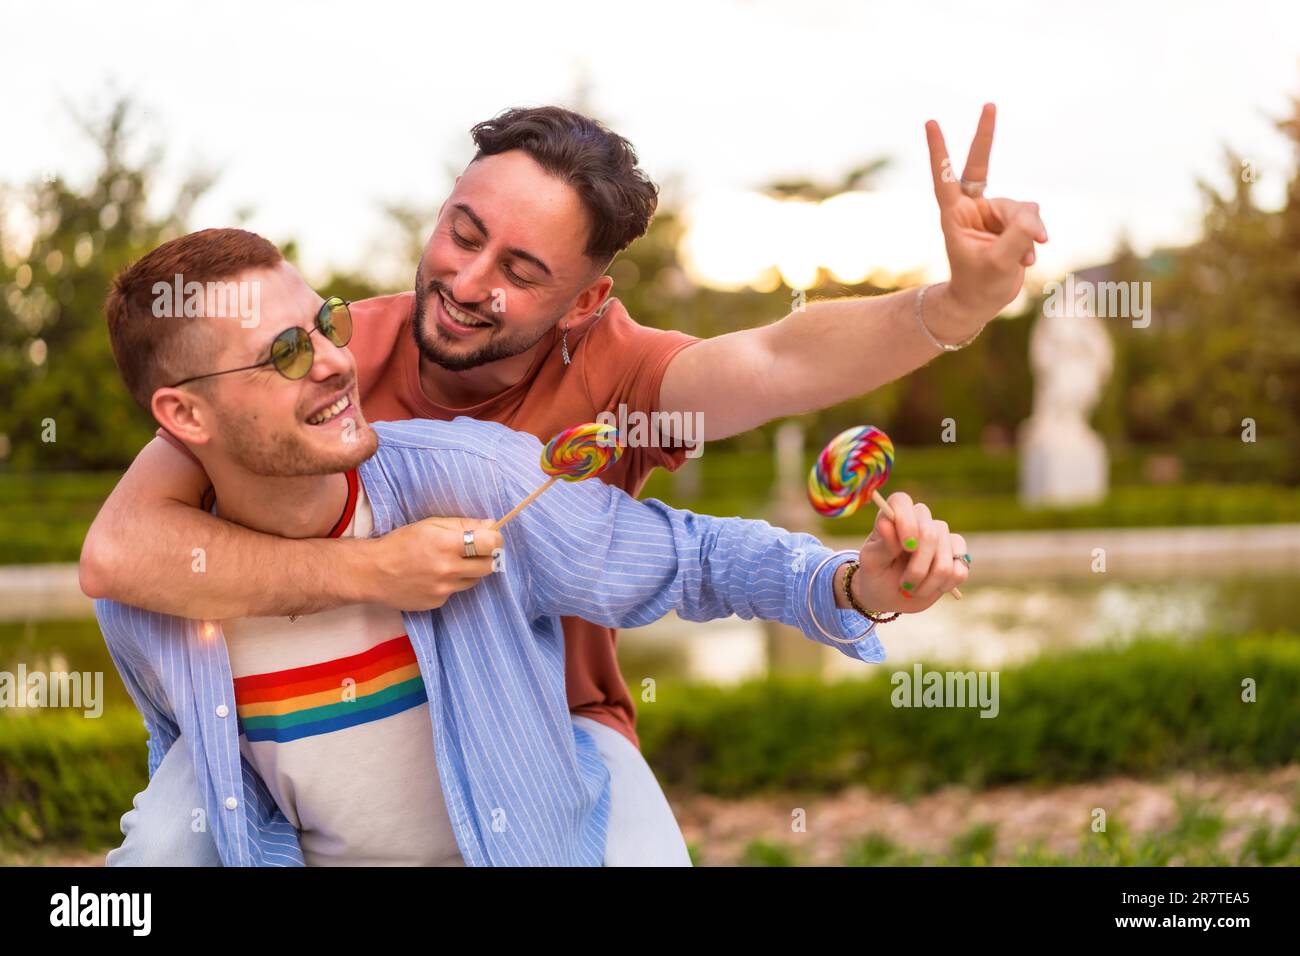 Portrait of gay boyfriend playing and one climbed on his back running eating a lollipop in the park on sunset in the city. lgbt concept Stock Photo